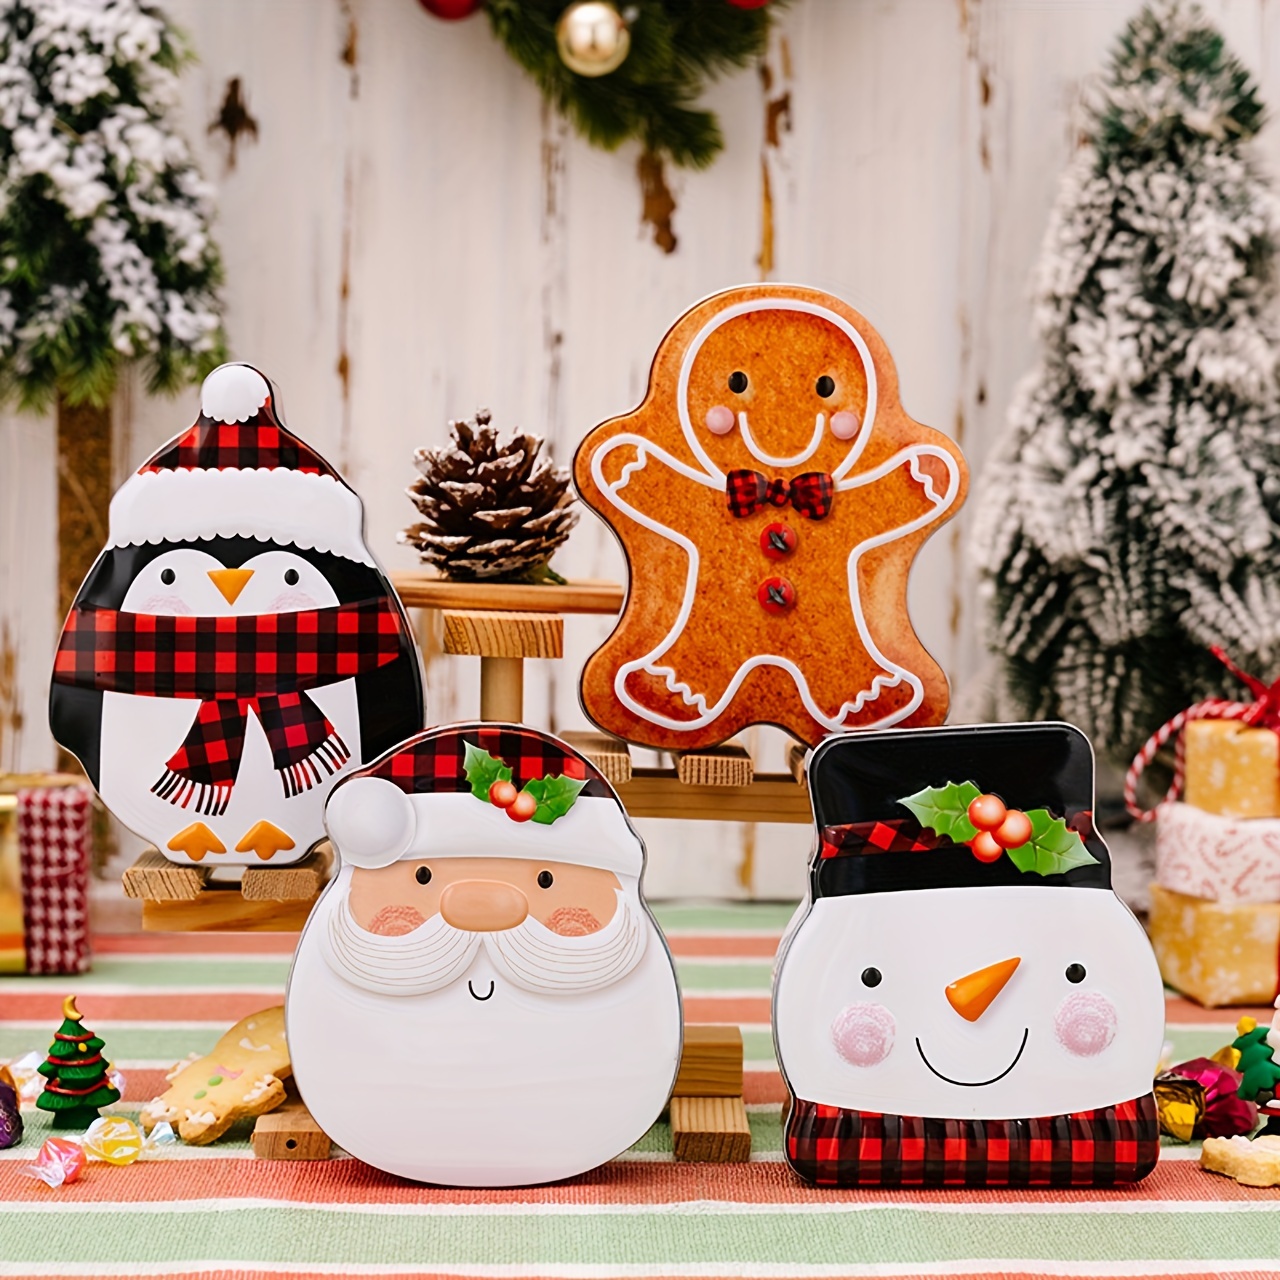  Decorative Christmas Holiday Themed Plastic Containers Jars 4  Pack with Stackable Lids for Cookies, Snacks, Candies, Treats Gnomes,  Gingerbread Men, Snowmen, Santa: Home & Kitchen